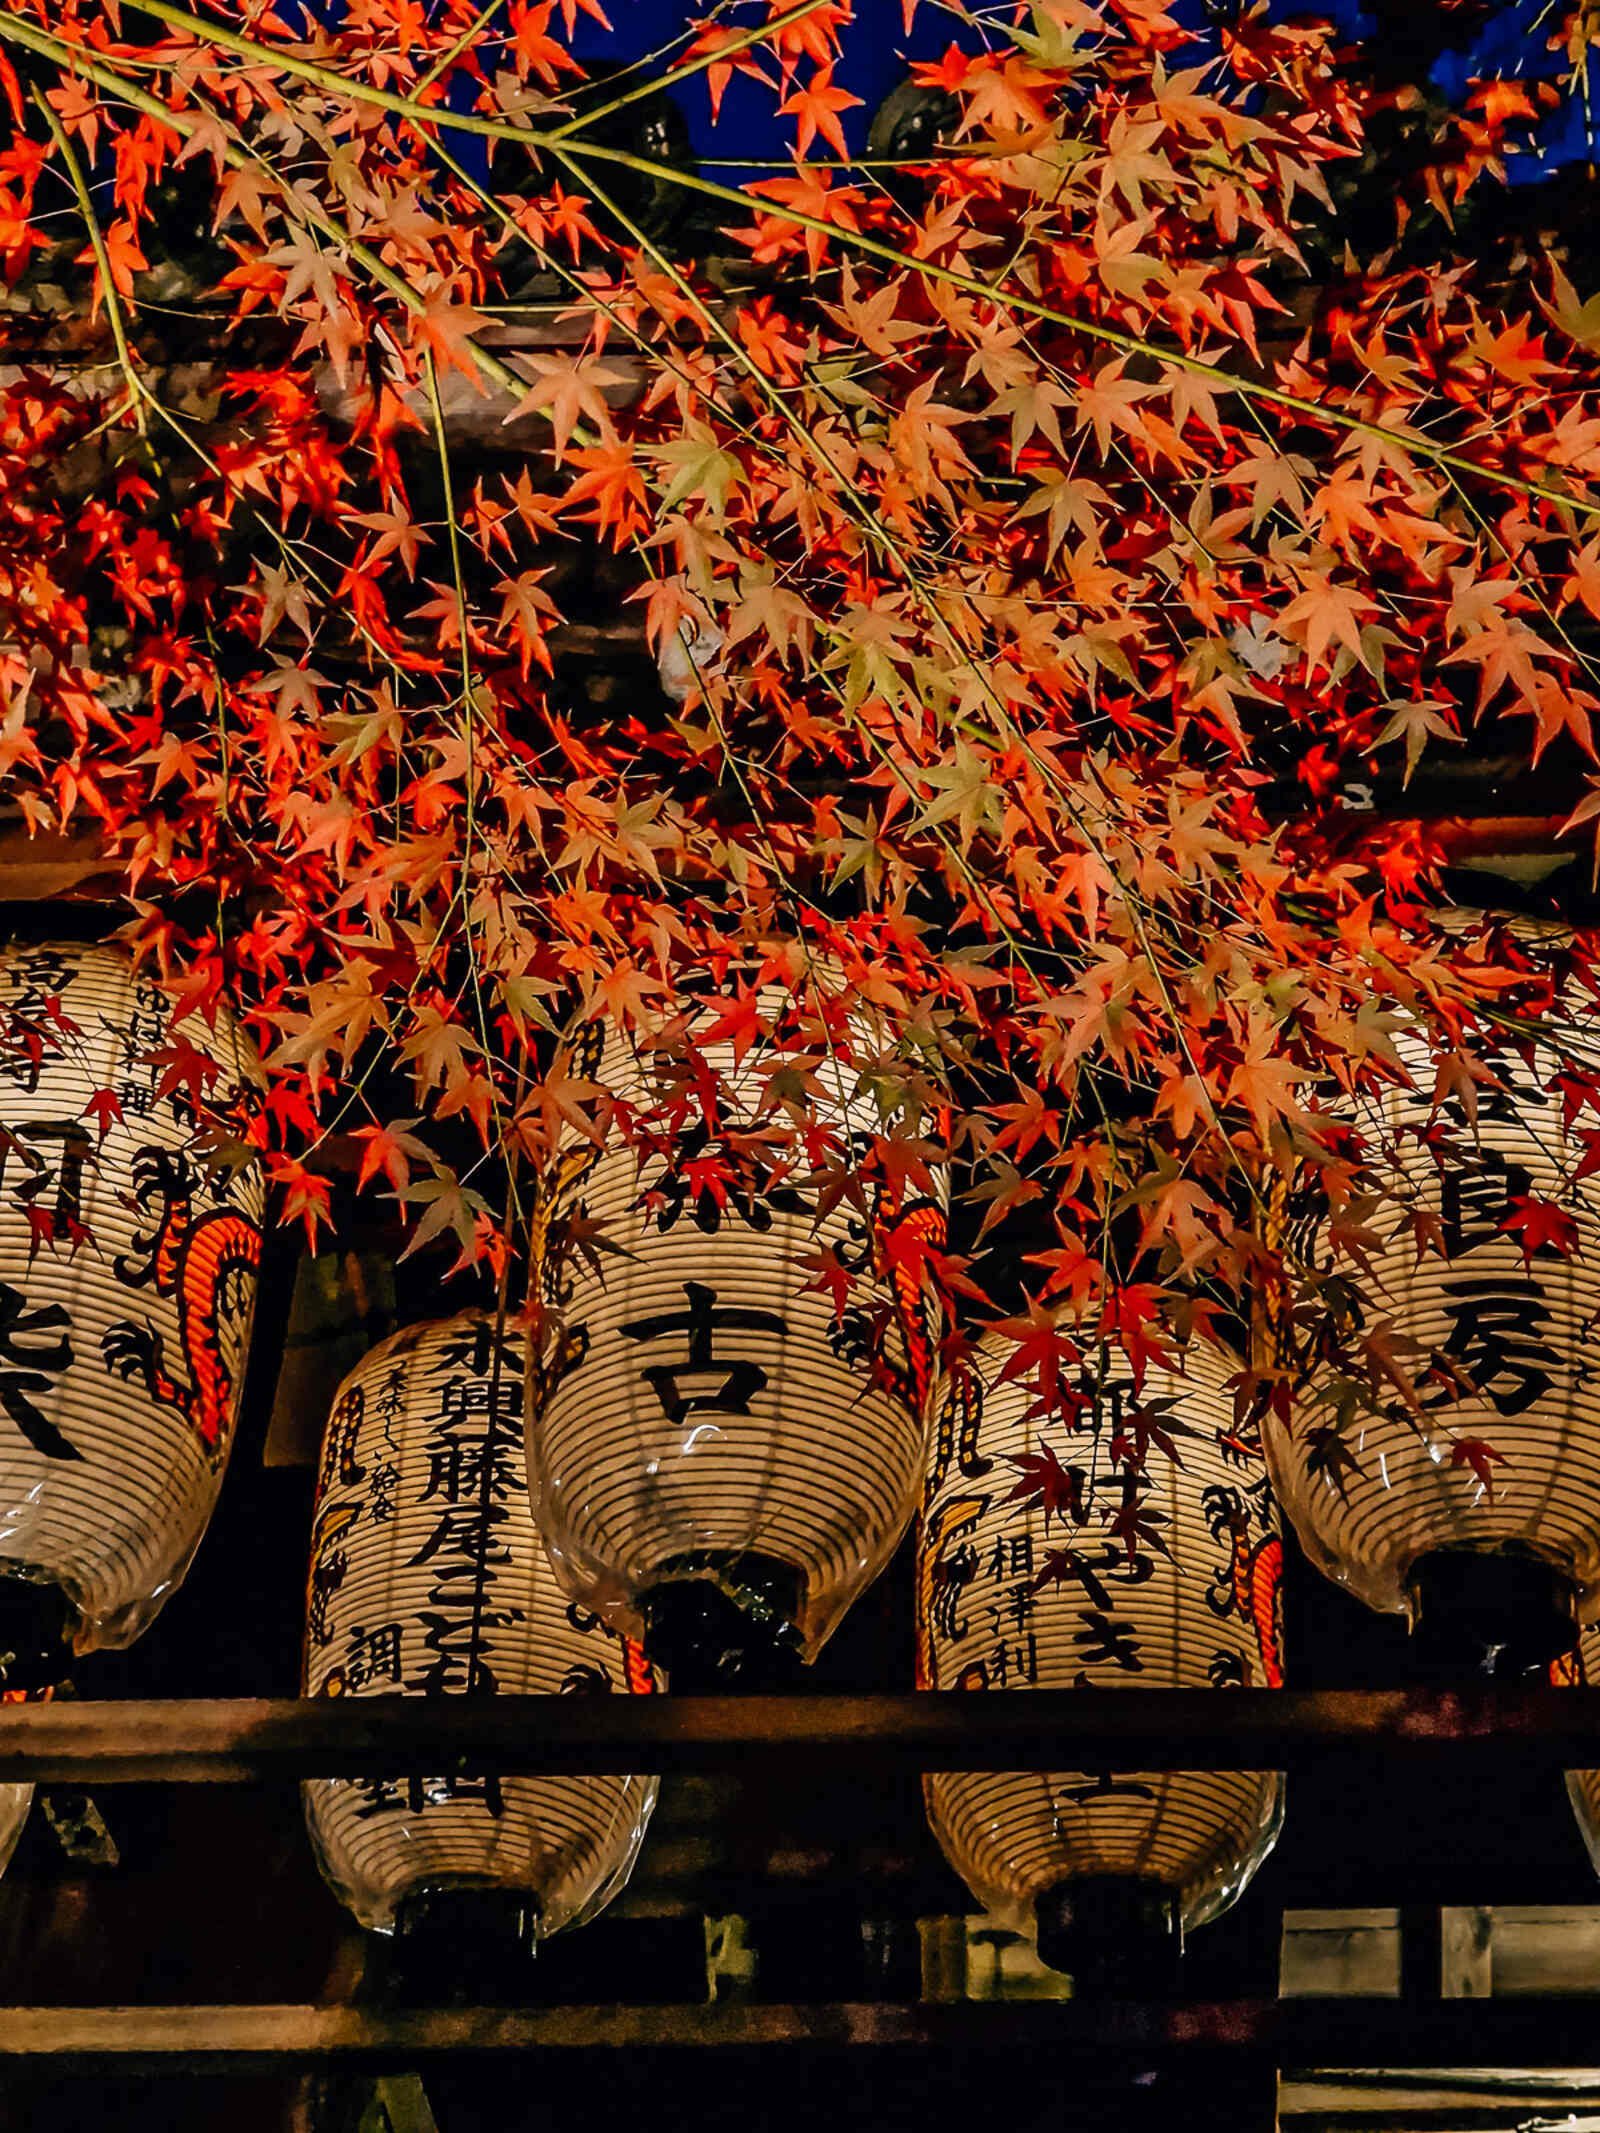 white Japanese lanterns partially obscured by red autumn leaves